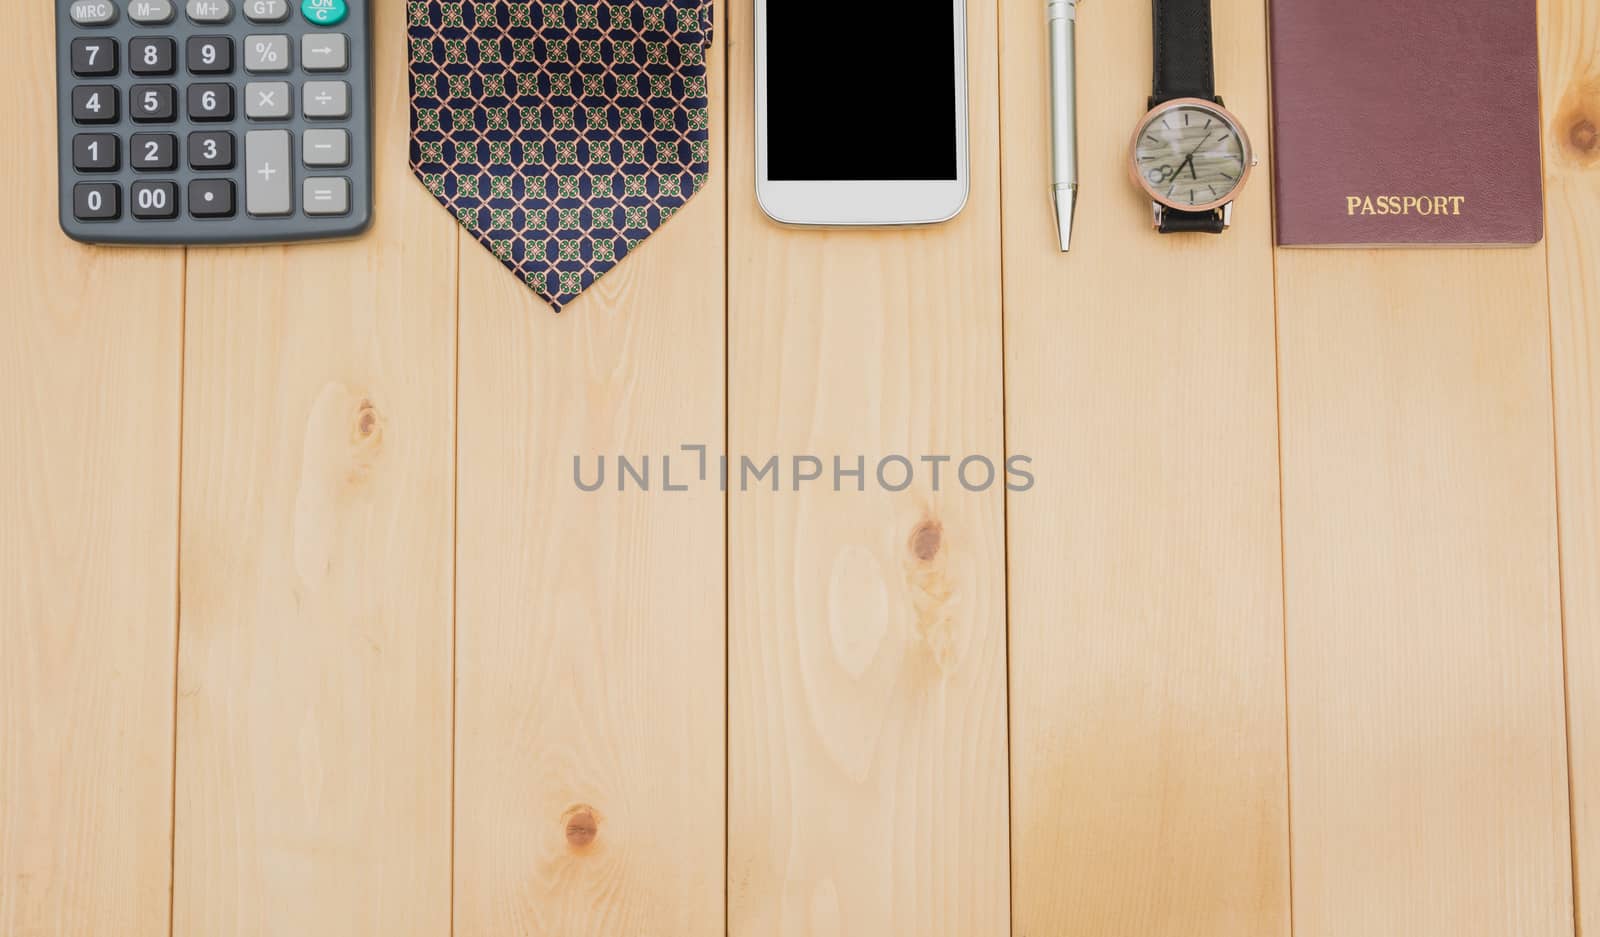 Office table with passport, necktie, calculator, watch and smart by kirisa99